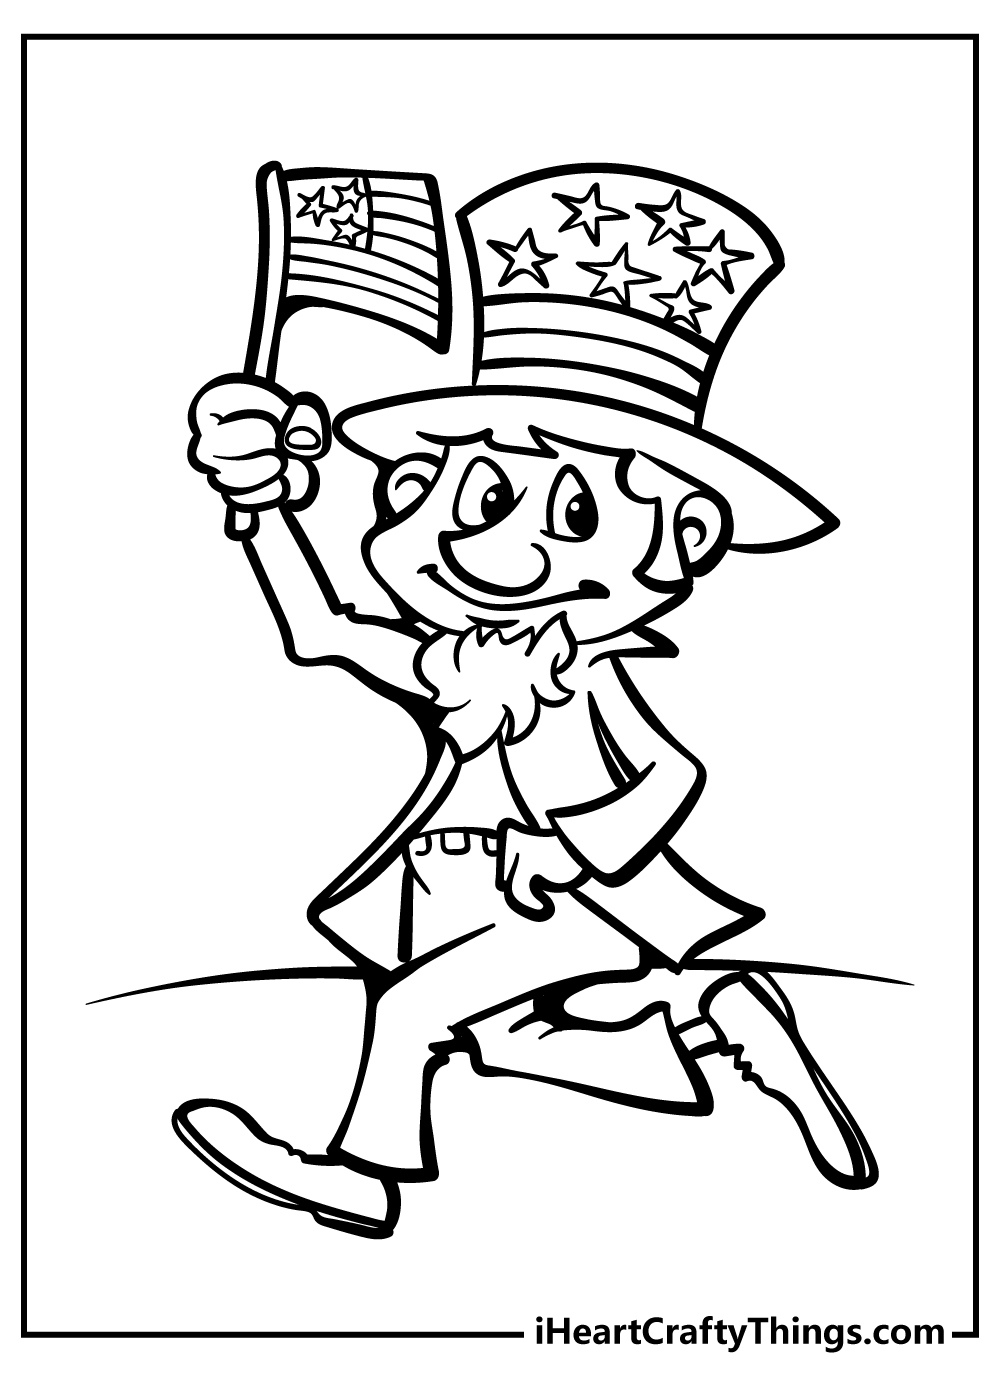 4th Of July Coloring Original Sheet for children free download